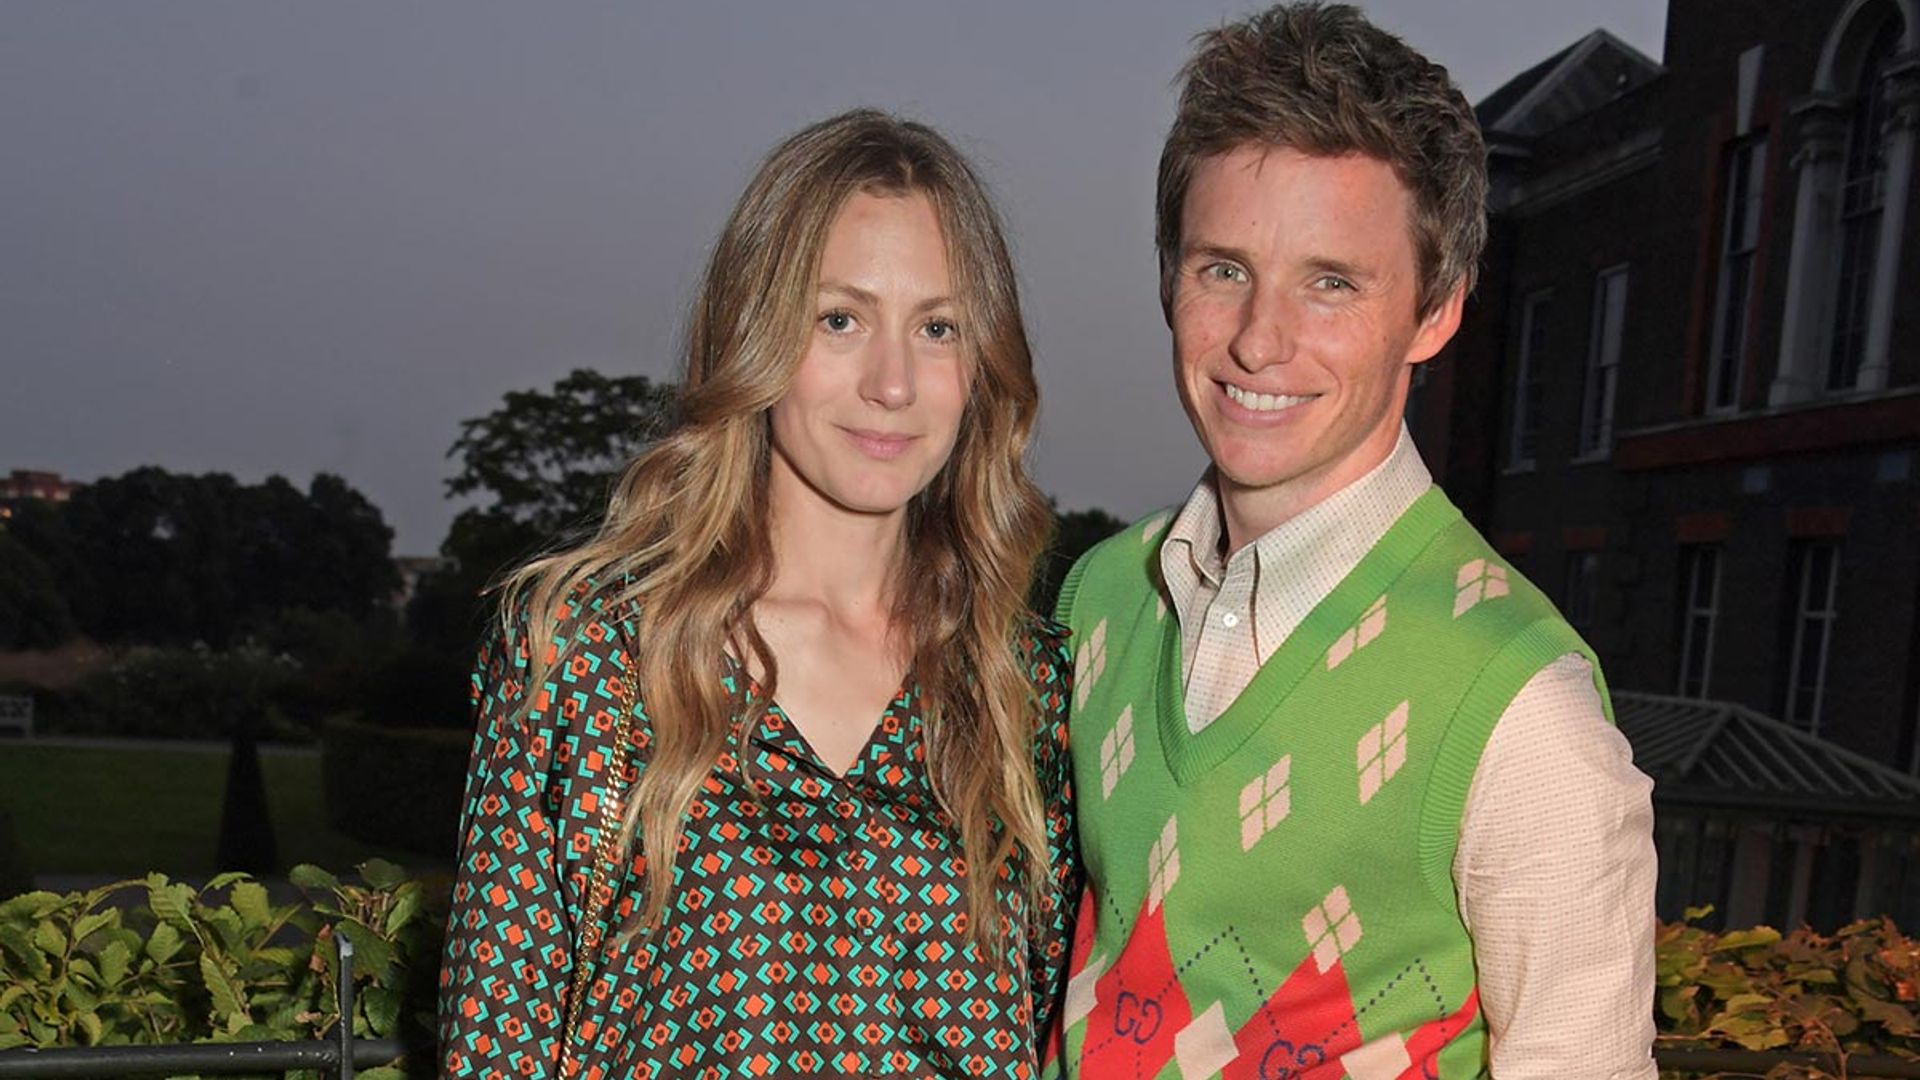 Eddie Redmayne's idyllic family home life revealed – after £2m holiday home was destroyed by fire